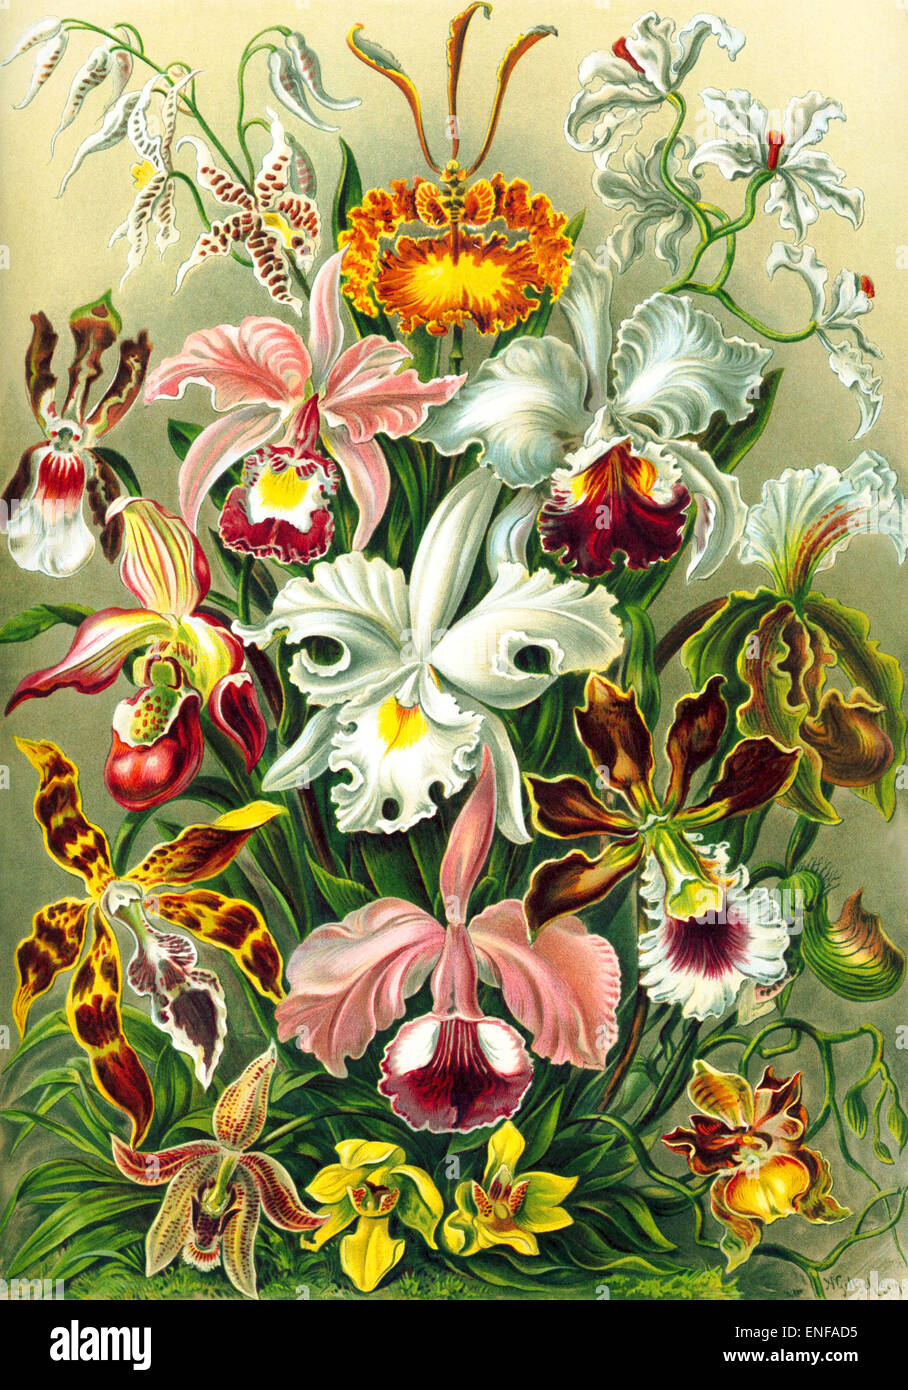 Orchidae (Orchids), by Ernst Haeckel, 1904 - Editorial use only. Stock Photo